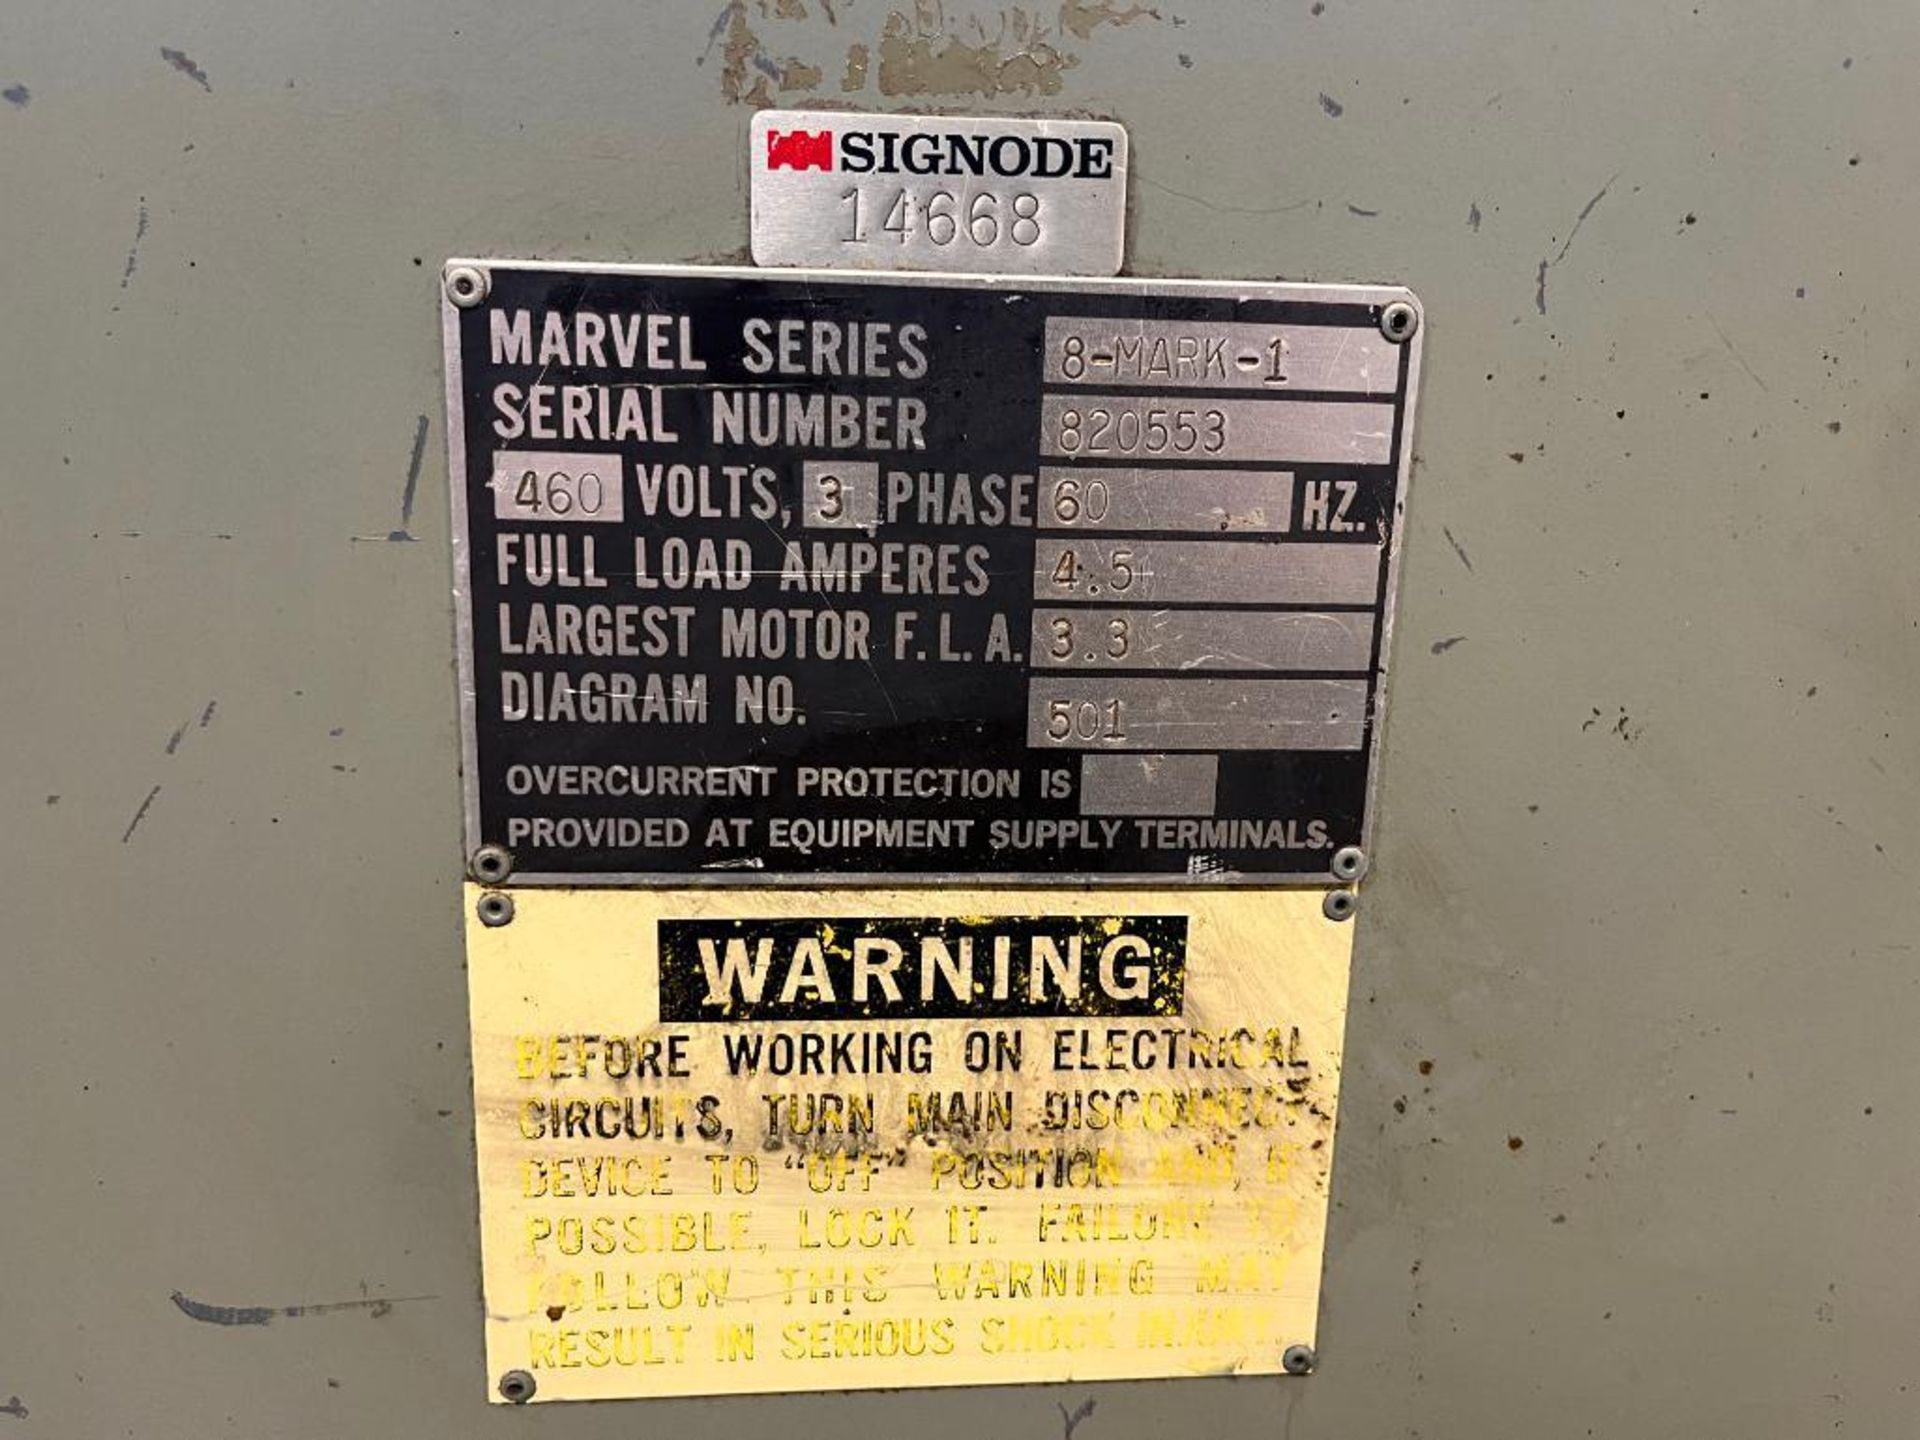 Marvel Series 8 Mark 1 Roll-in Band Saw S/N 820553 - Image 5 of 13